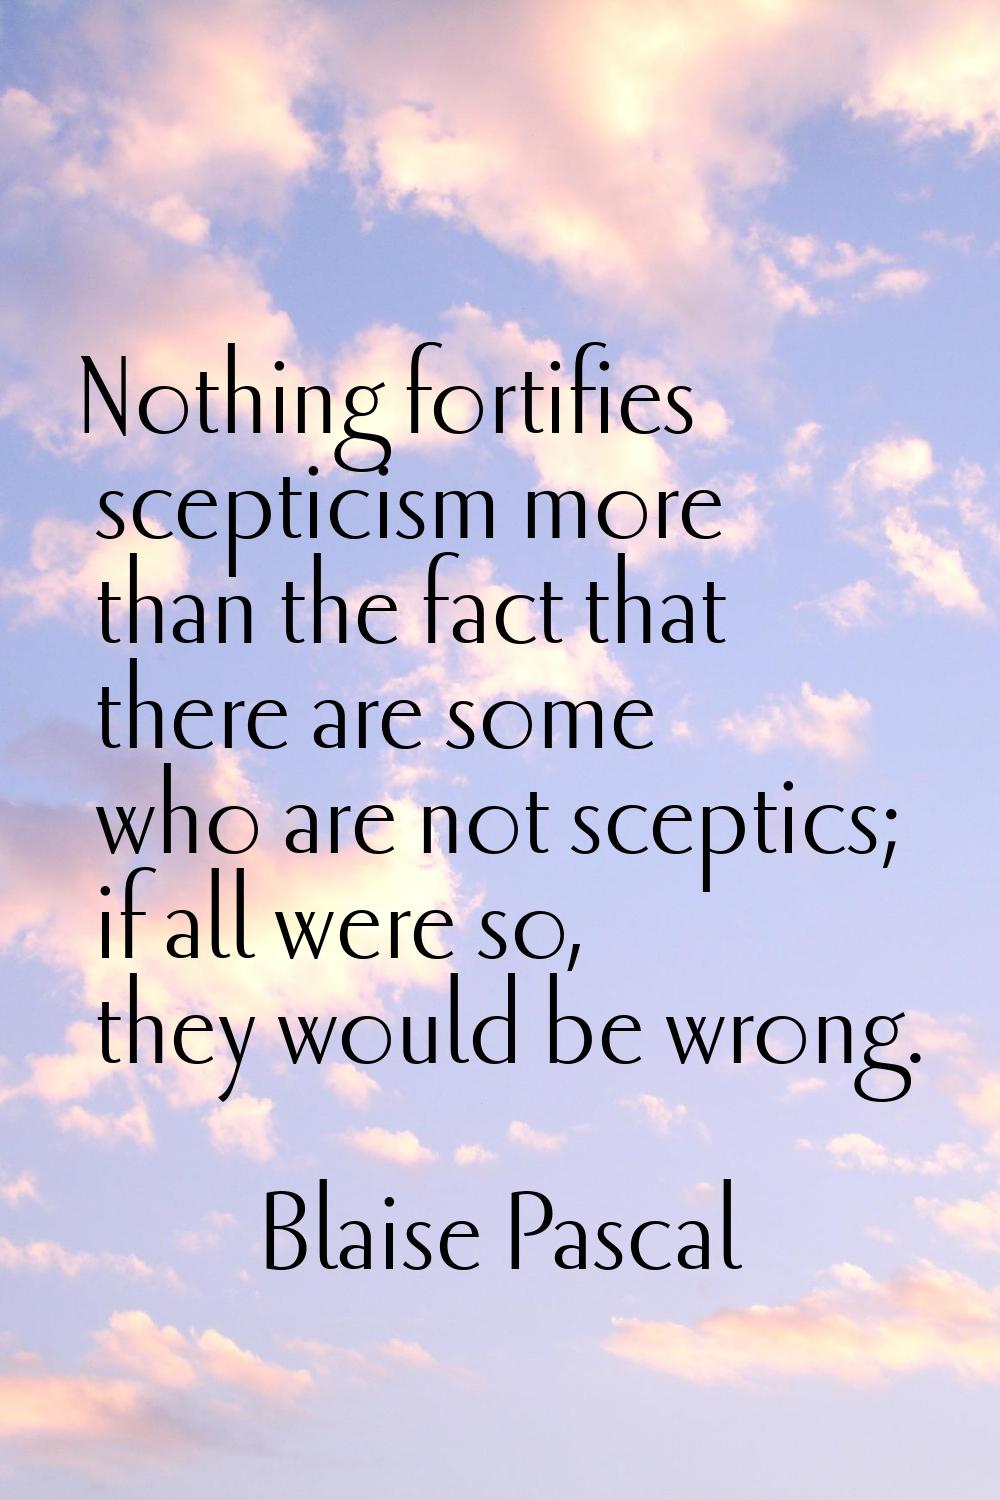 Nothing fortifies scepticism more than the fact that there are some who are not sceptics; if all we